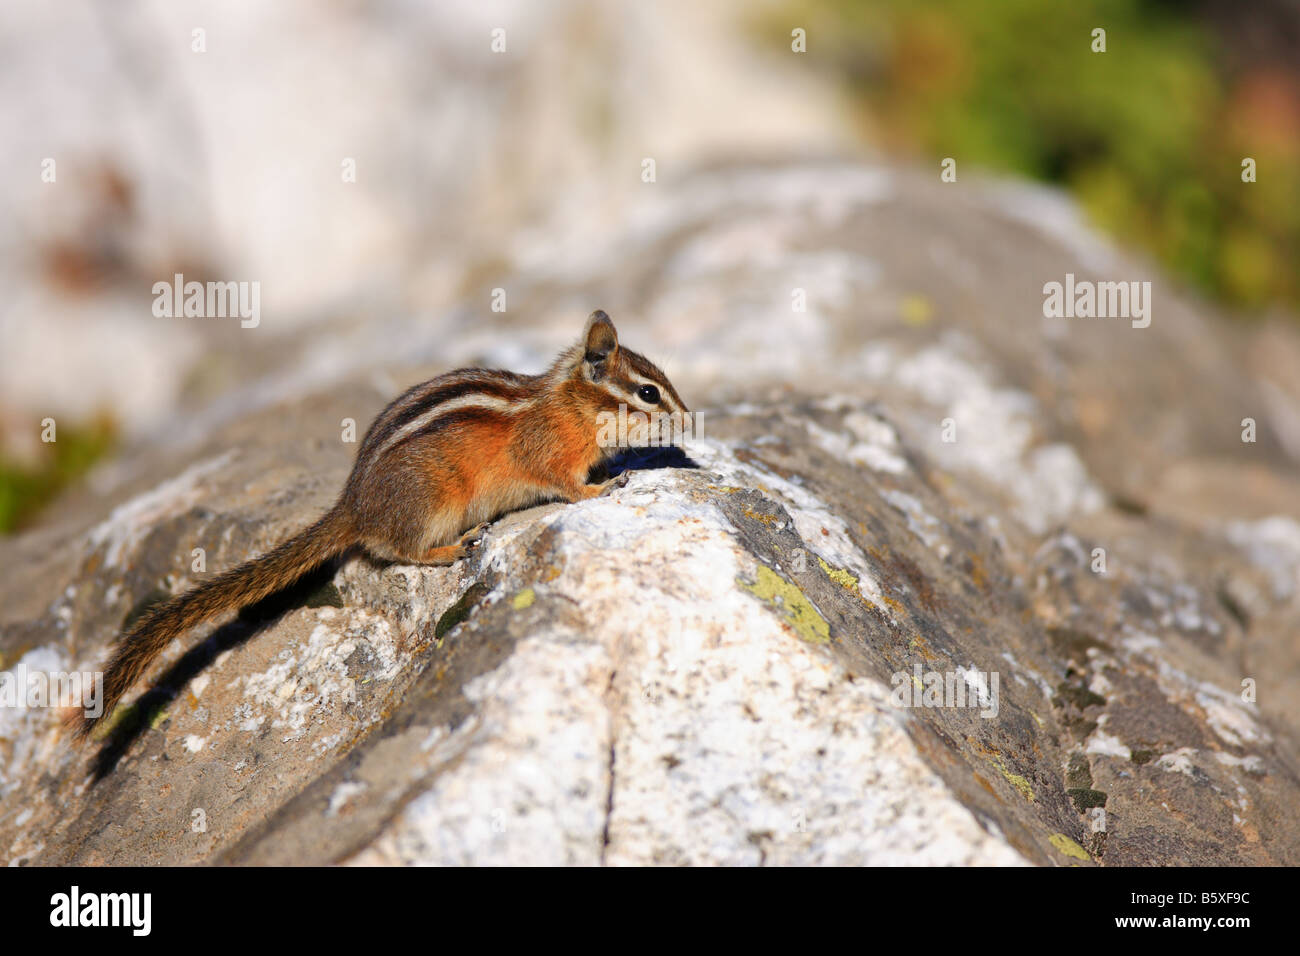 Least Chipmunk perched on a rock Stock Photo